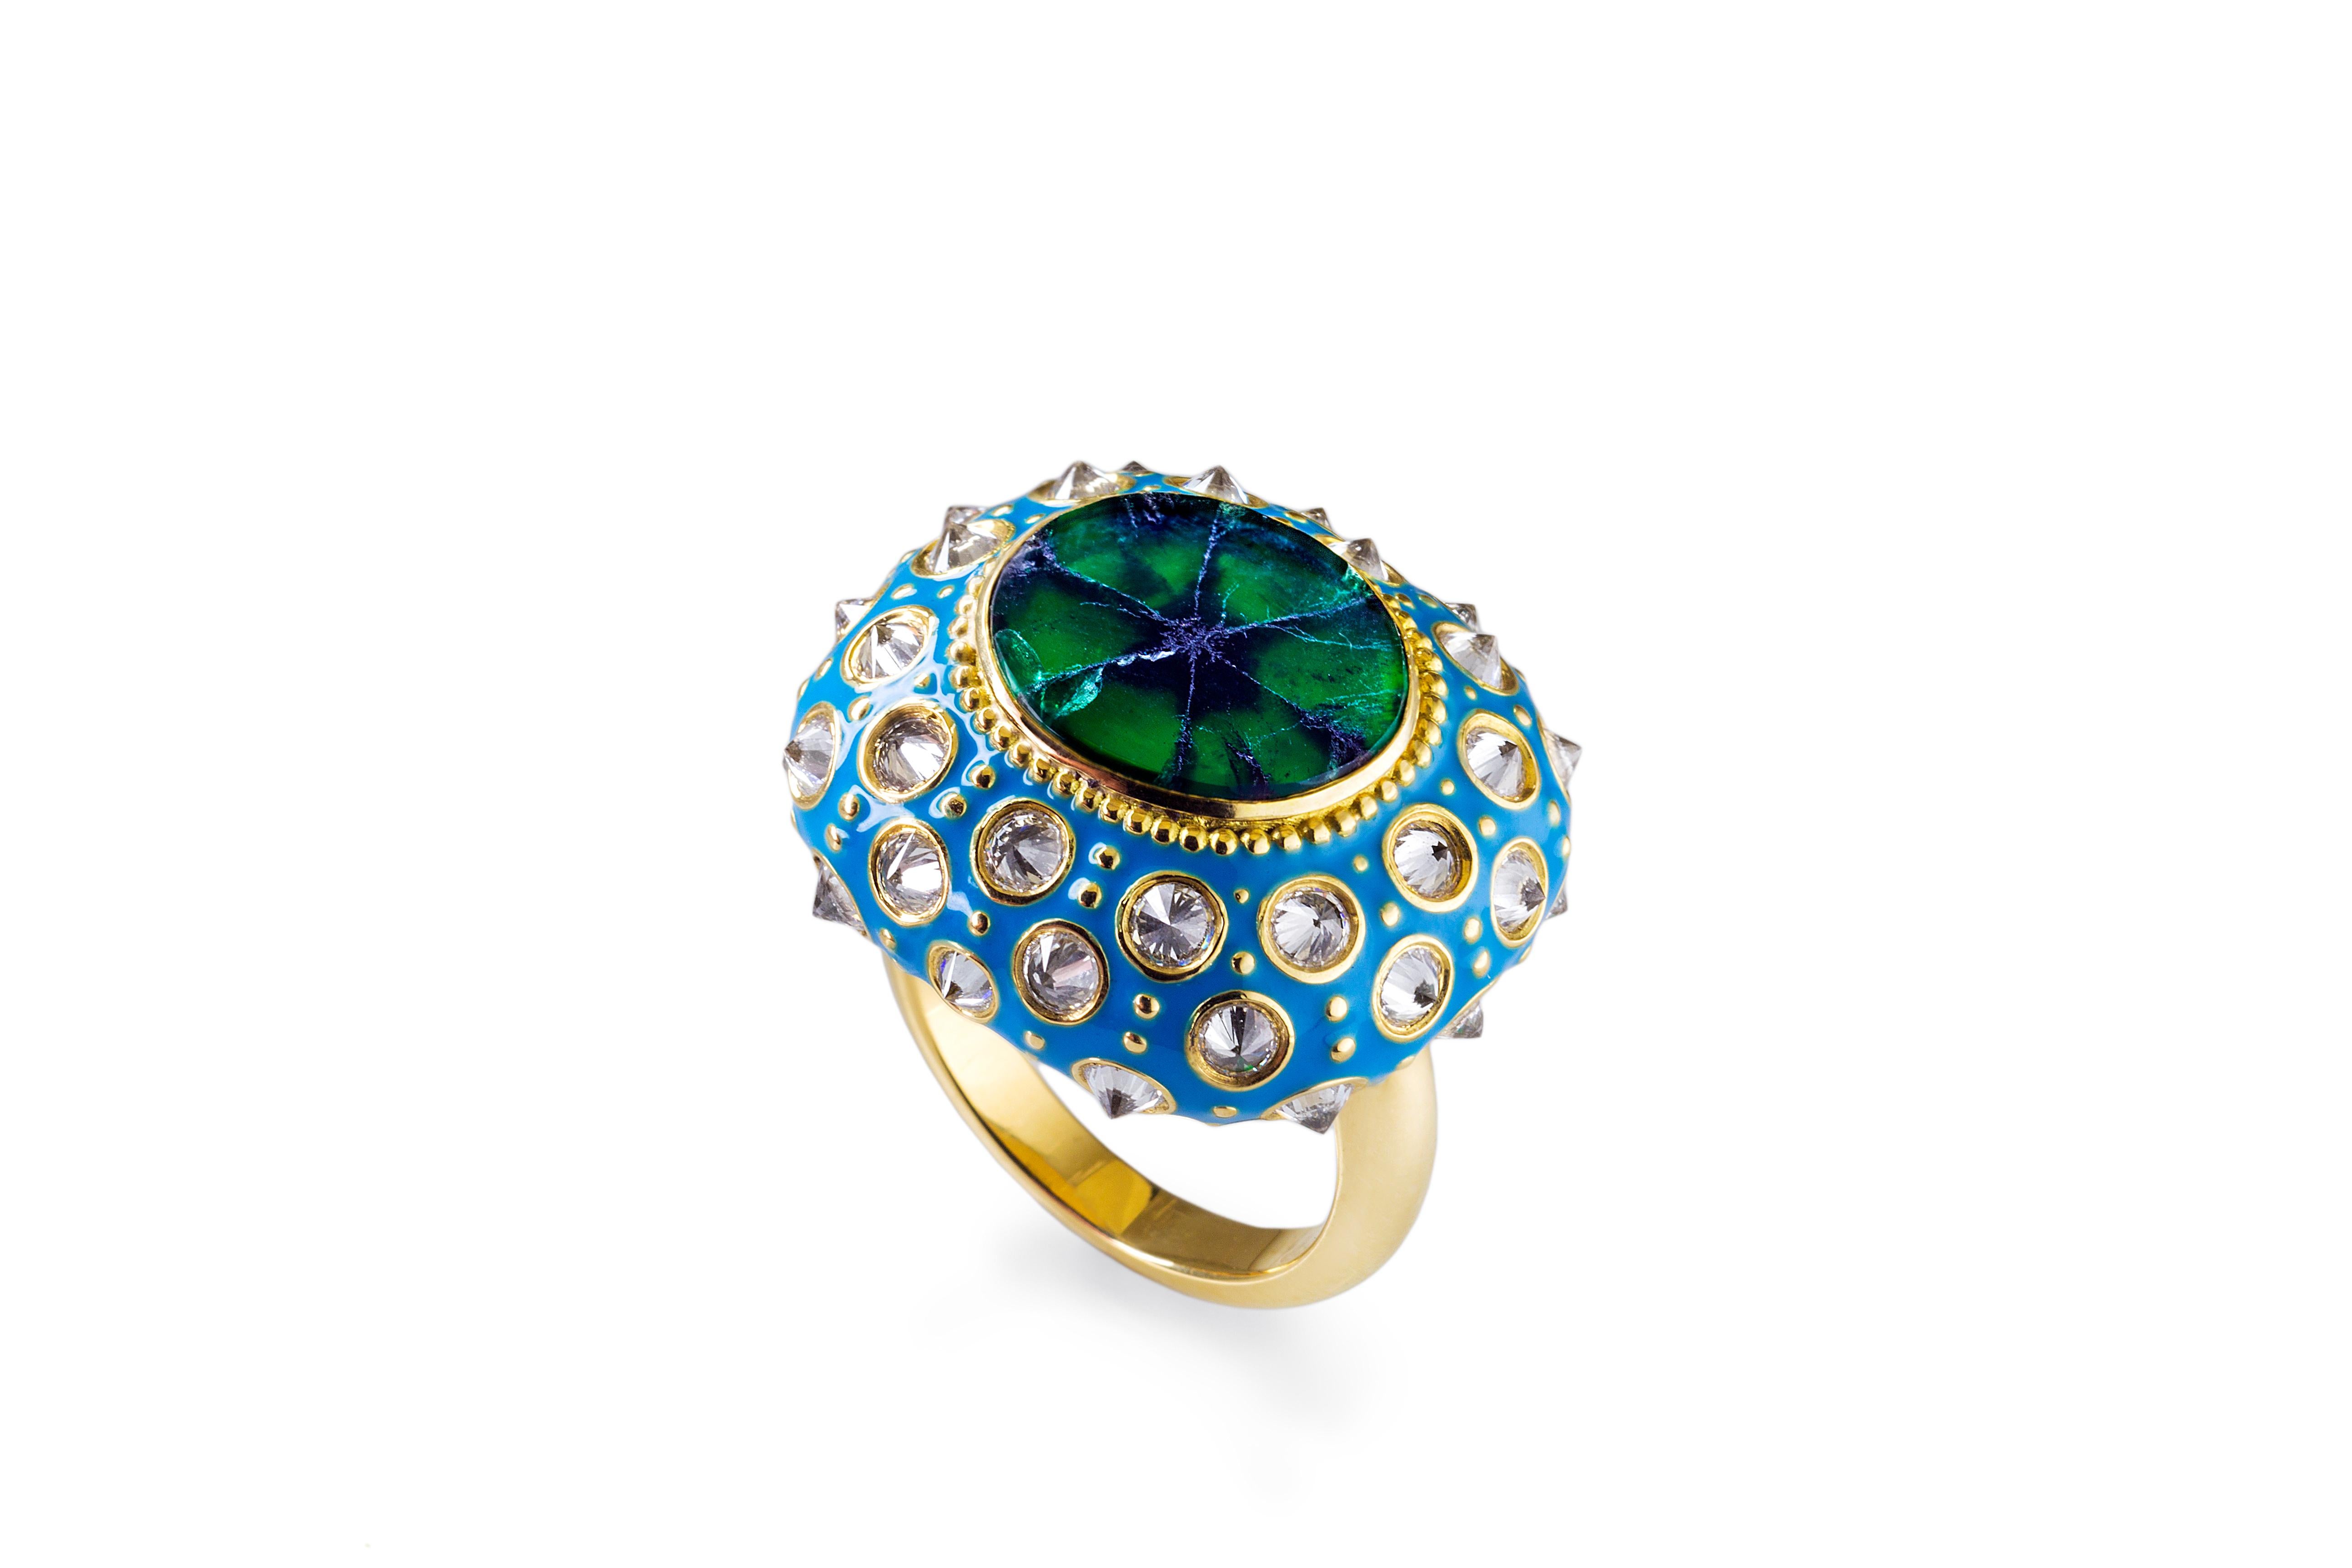 ONE-OF-A-KIND

AnaKatarina’s ‘Straight No Chaser’ ‘Ring is an homage to the beautiful sea urchin and its totem of intuition and evolution. This beautiful work of art is one-of-a-kind. A rare Trapaiche emerald adorns the center of the sea urchin